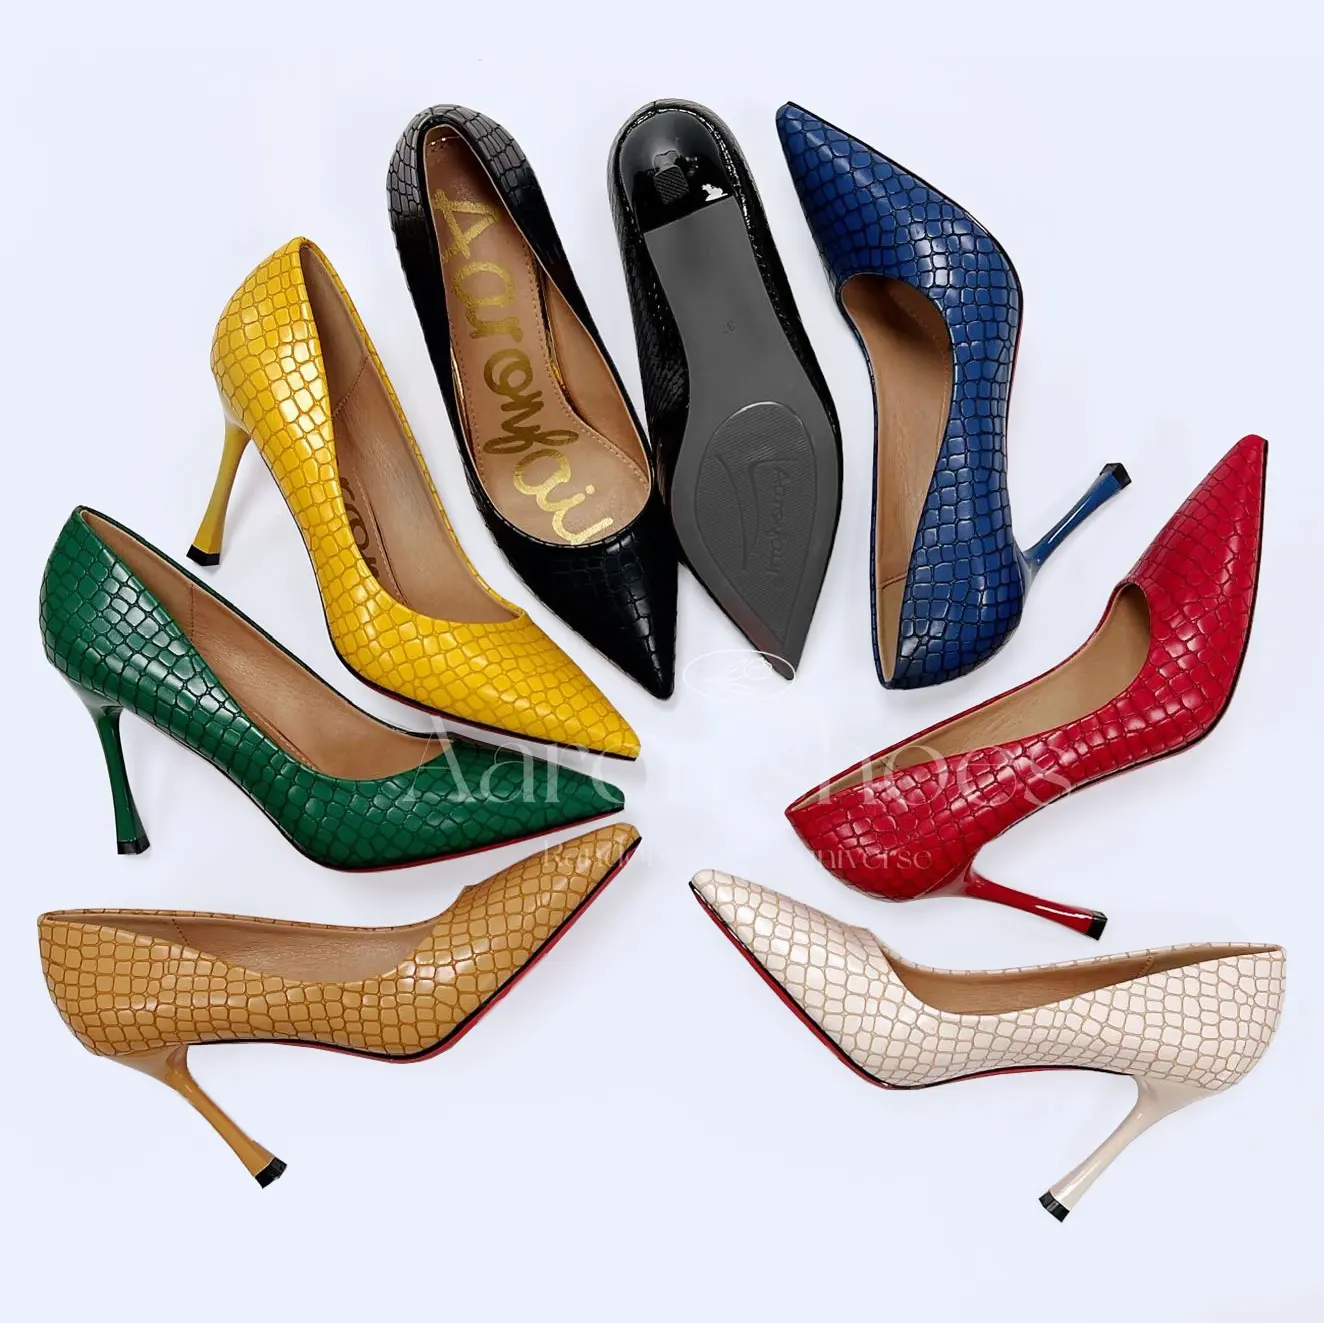 New Arrival Women Sexy Elegant Comfortable High Heel Glossy Dress Shoes For Wedding